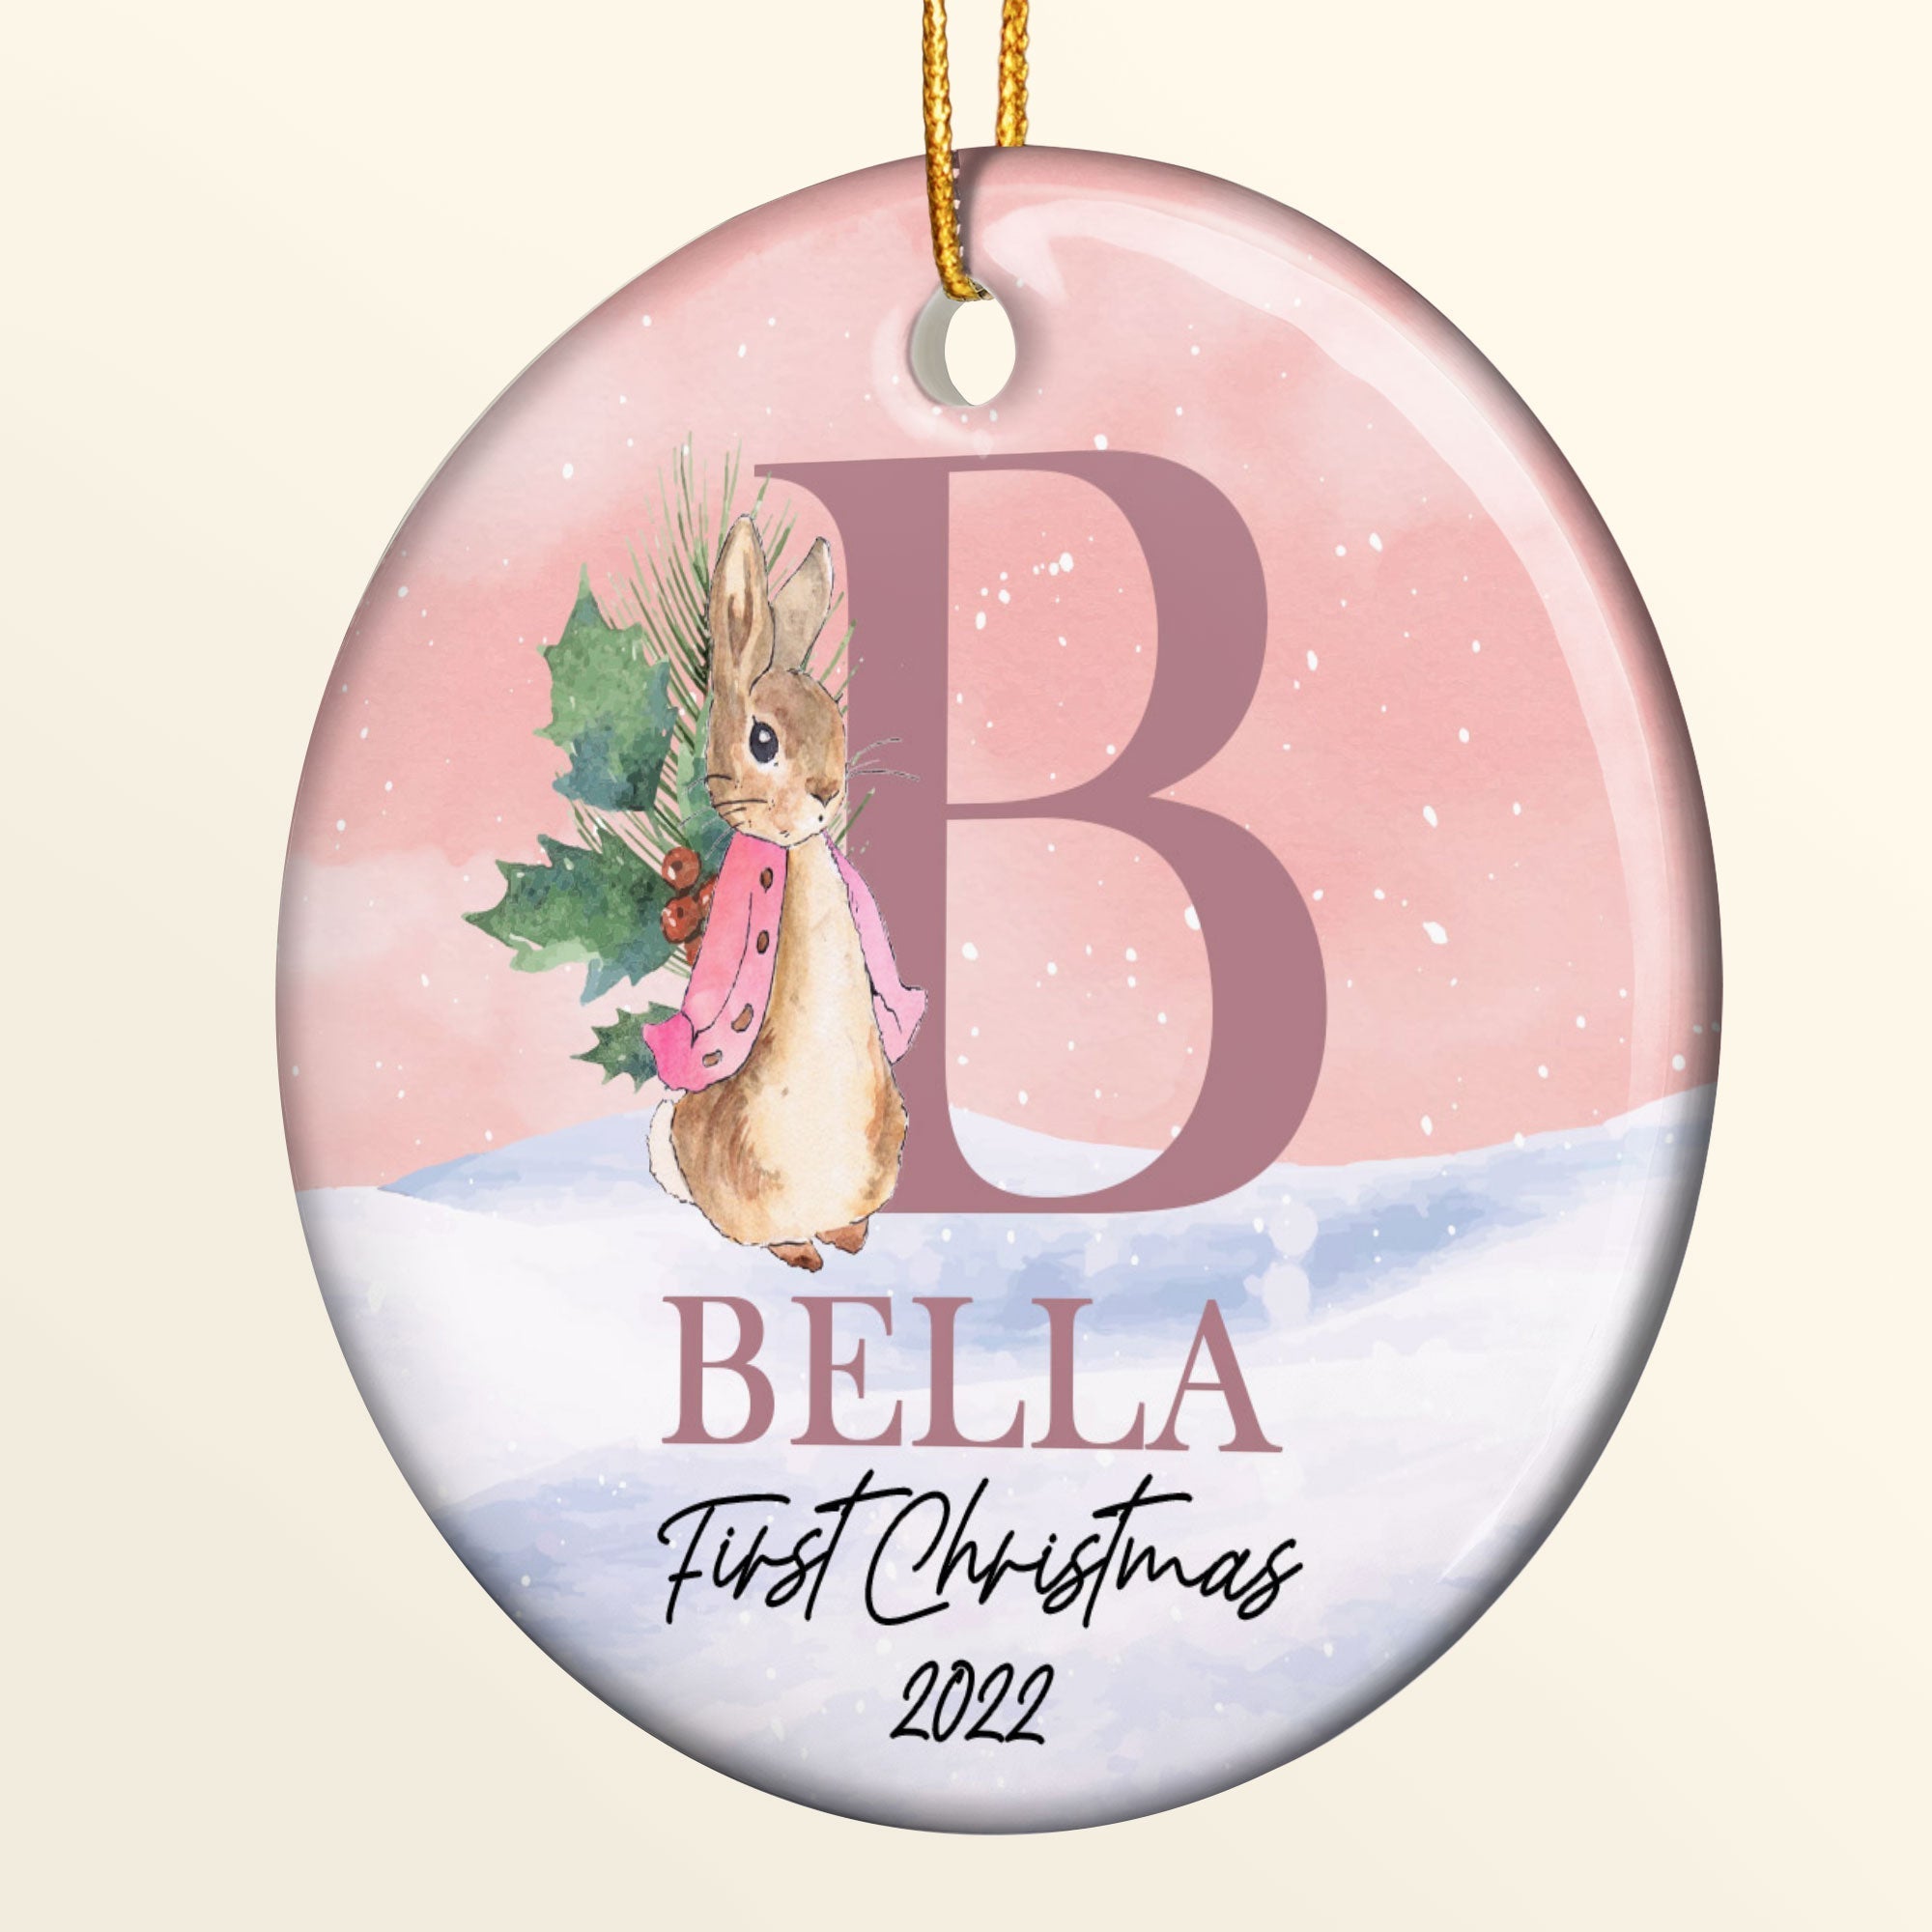 Baby's First Christmas - Personalized Ceramic Ornament - Christmas Gift For Mom, Dad, New Parents